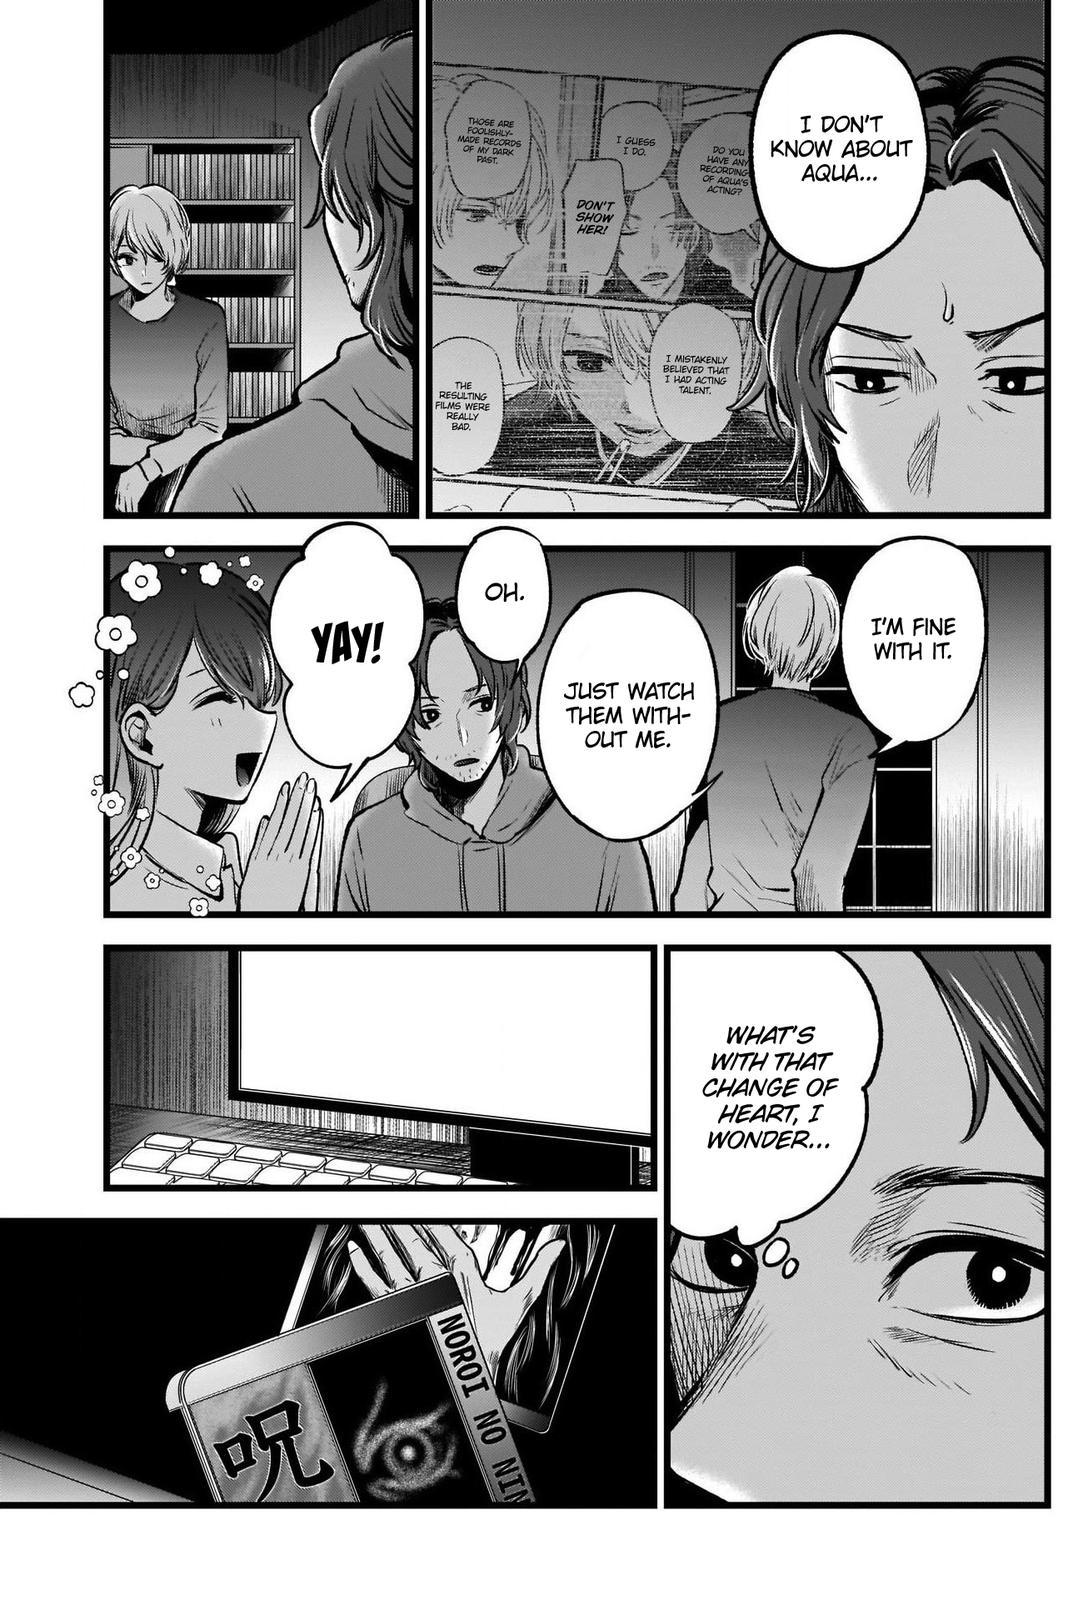 I Can Copy Talents Ch.58 Page 9 - Mangago